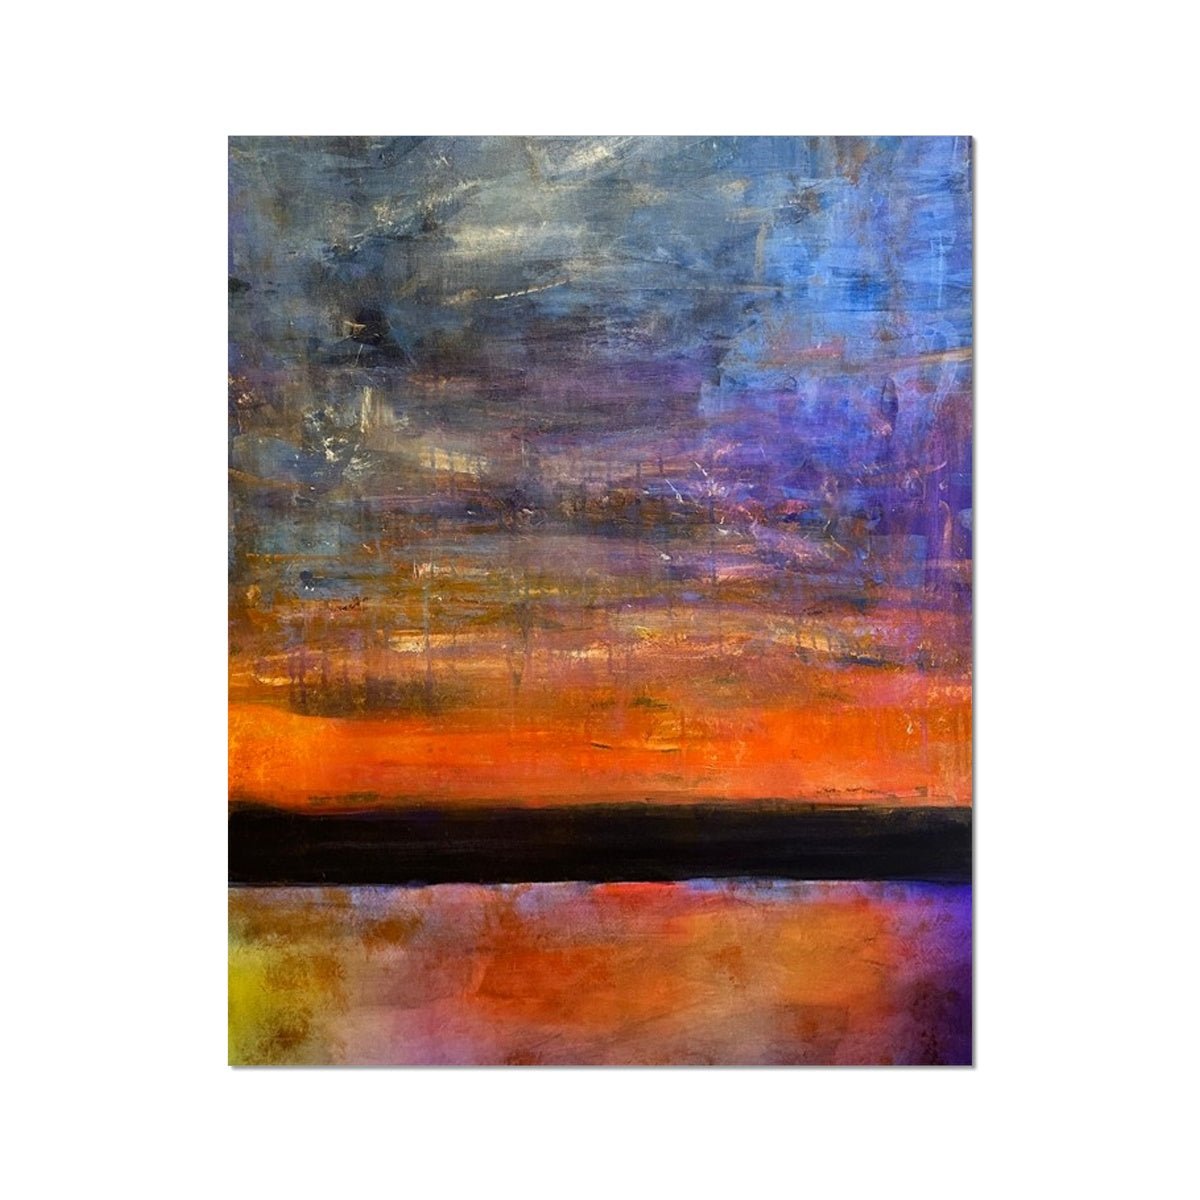 Horizon Dreams Abstract Painting | Artist Proof Collector Prints From Scotland-Artist Proof Collector Prints-Abstract & Impressionistic Art Gallery-16"x20"-Paintings, Prints, Homeware, Art Gifts From Scotland By Scottish Artist Kevin Hunter